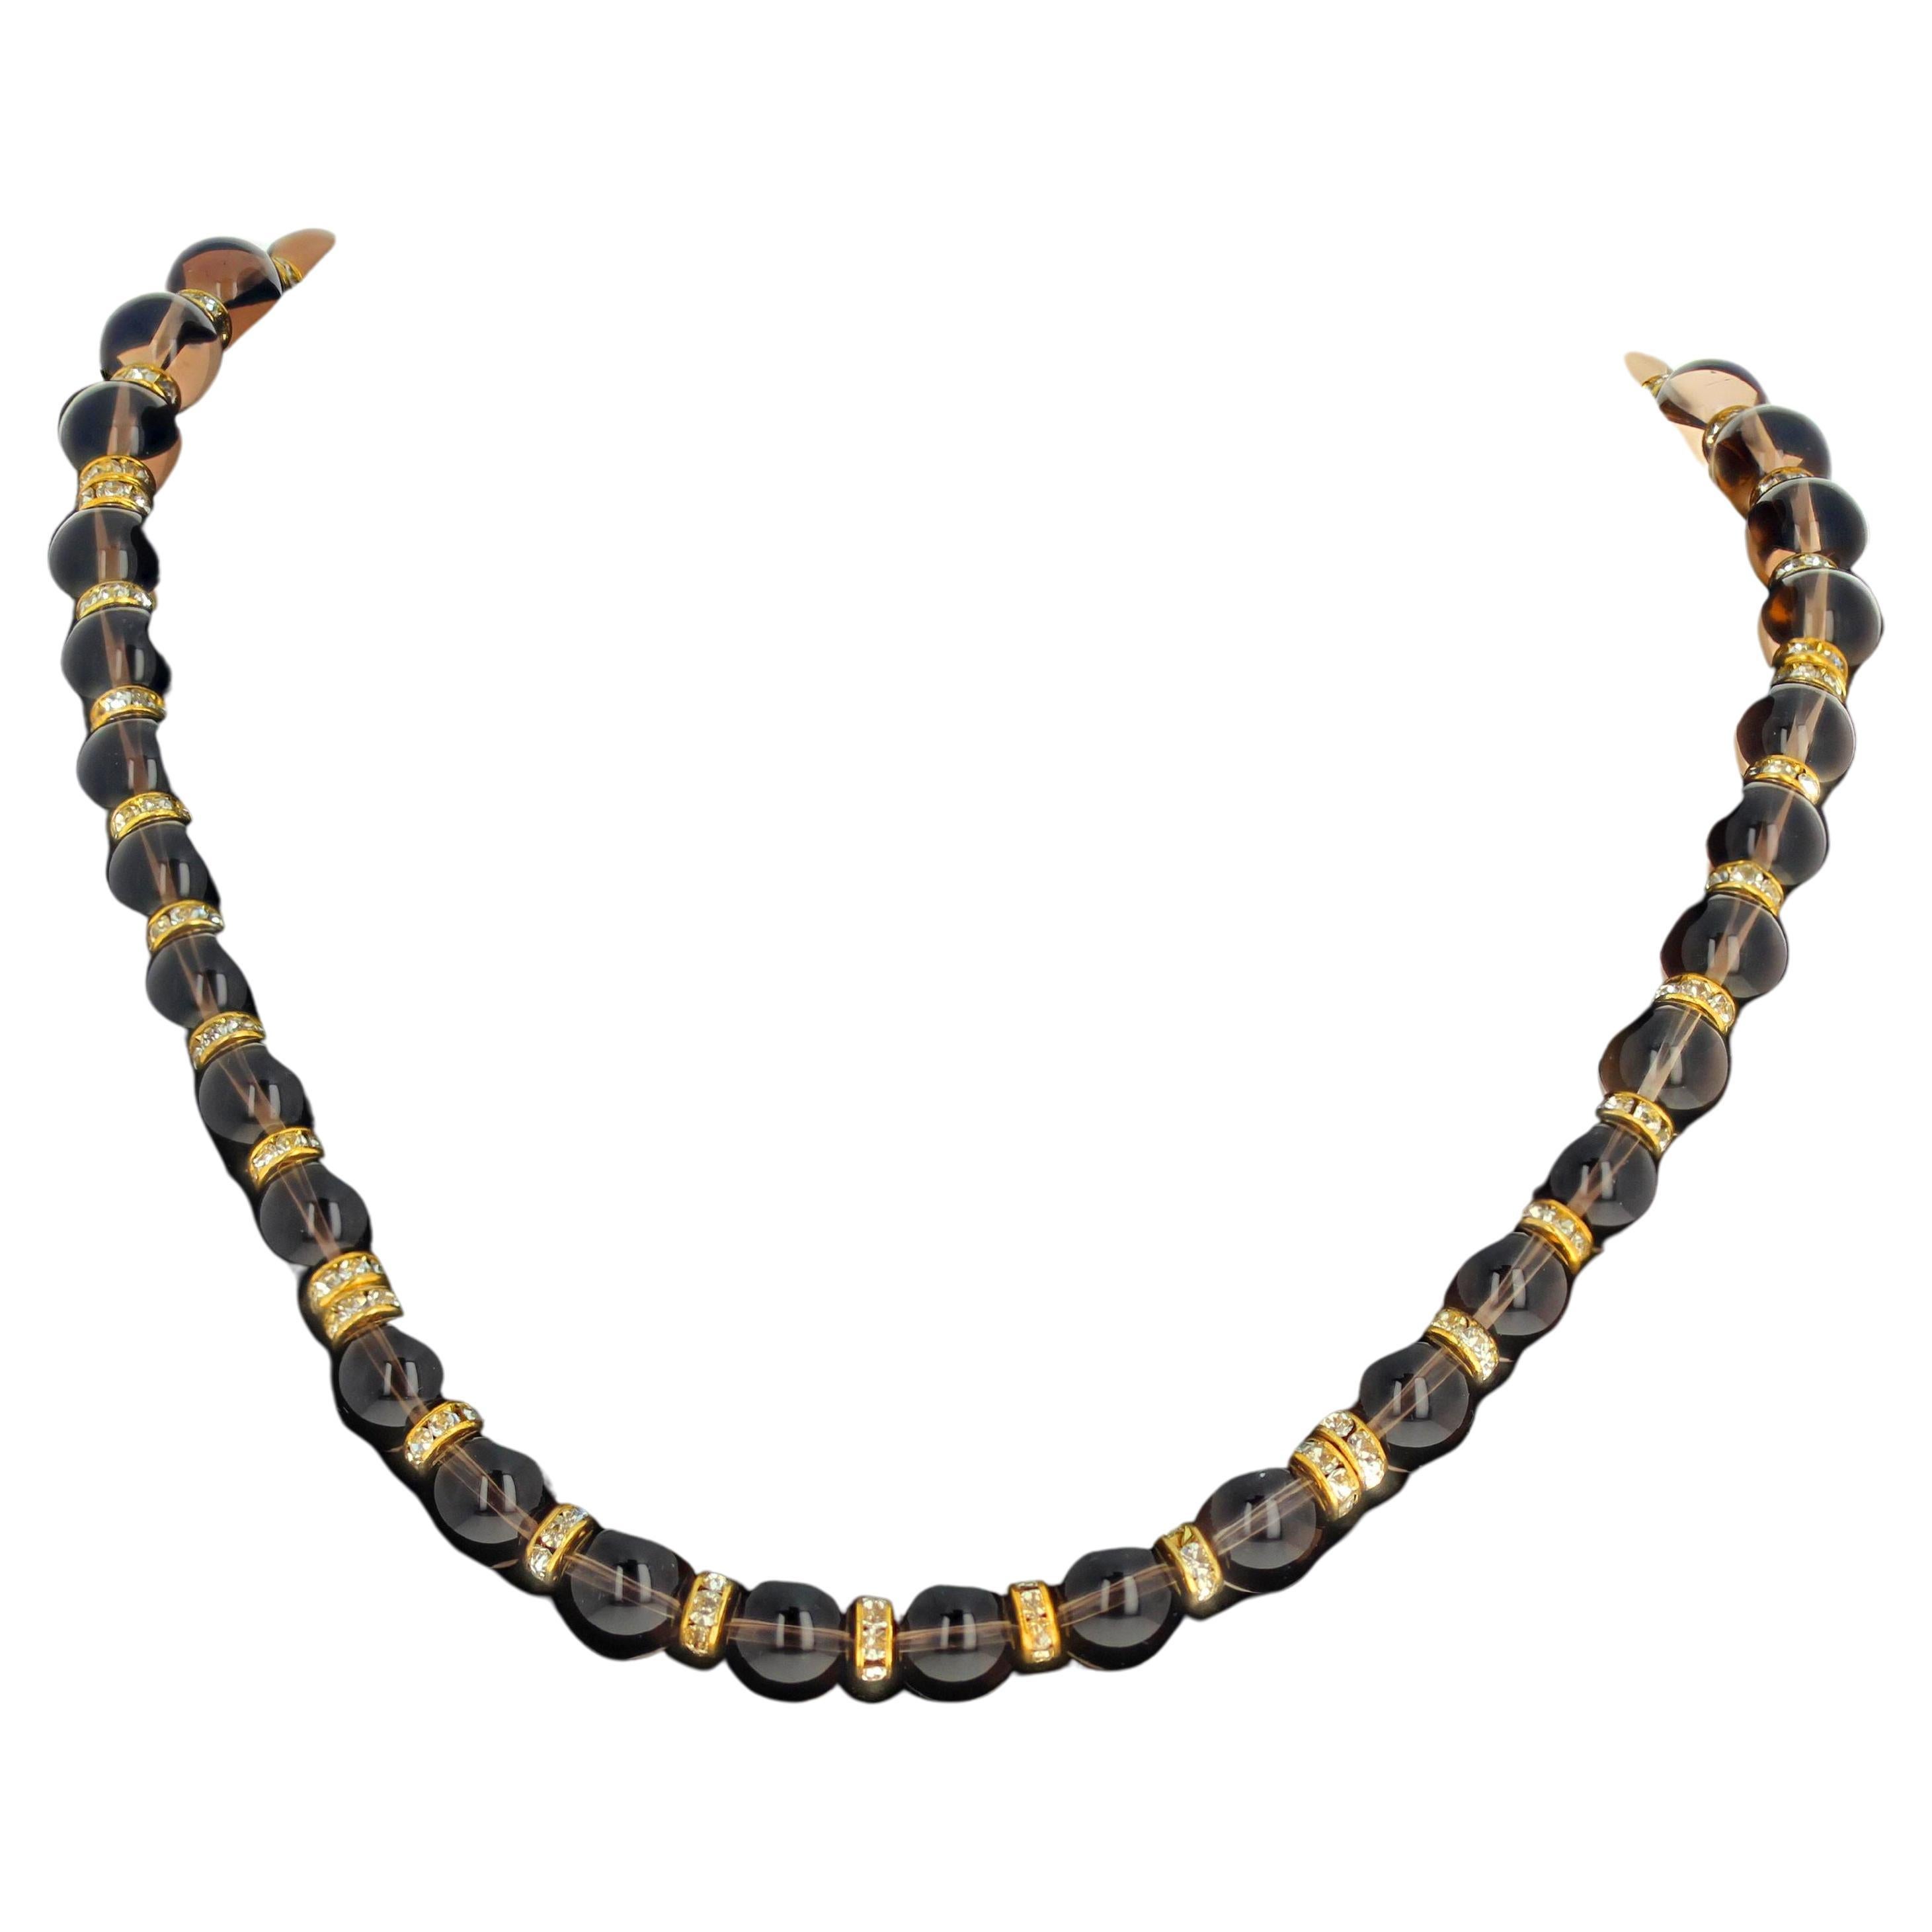 This beautiful outstanding necklace of natural real Smoky Quartz is enhanced with sparkling gold plated spacers.  The Smoky Quartz are highly polished glowing approximately 10mm.  The clasp is an easy to use toggle clasp.  This is lovely to wear on